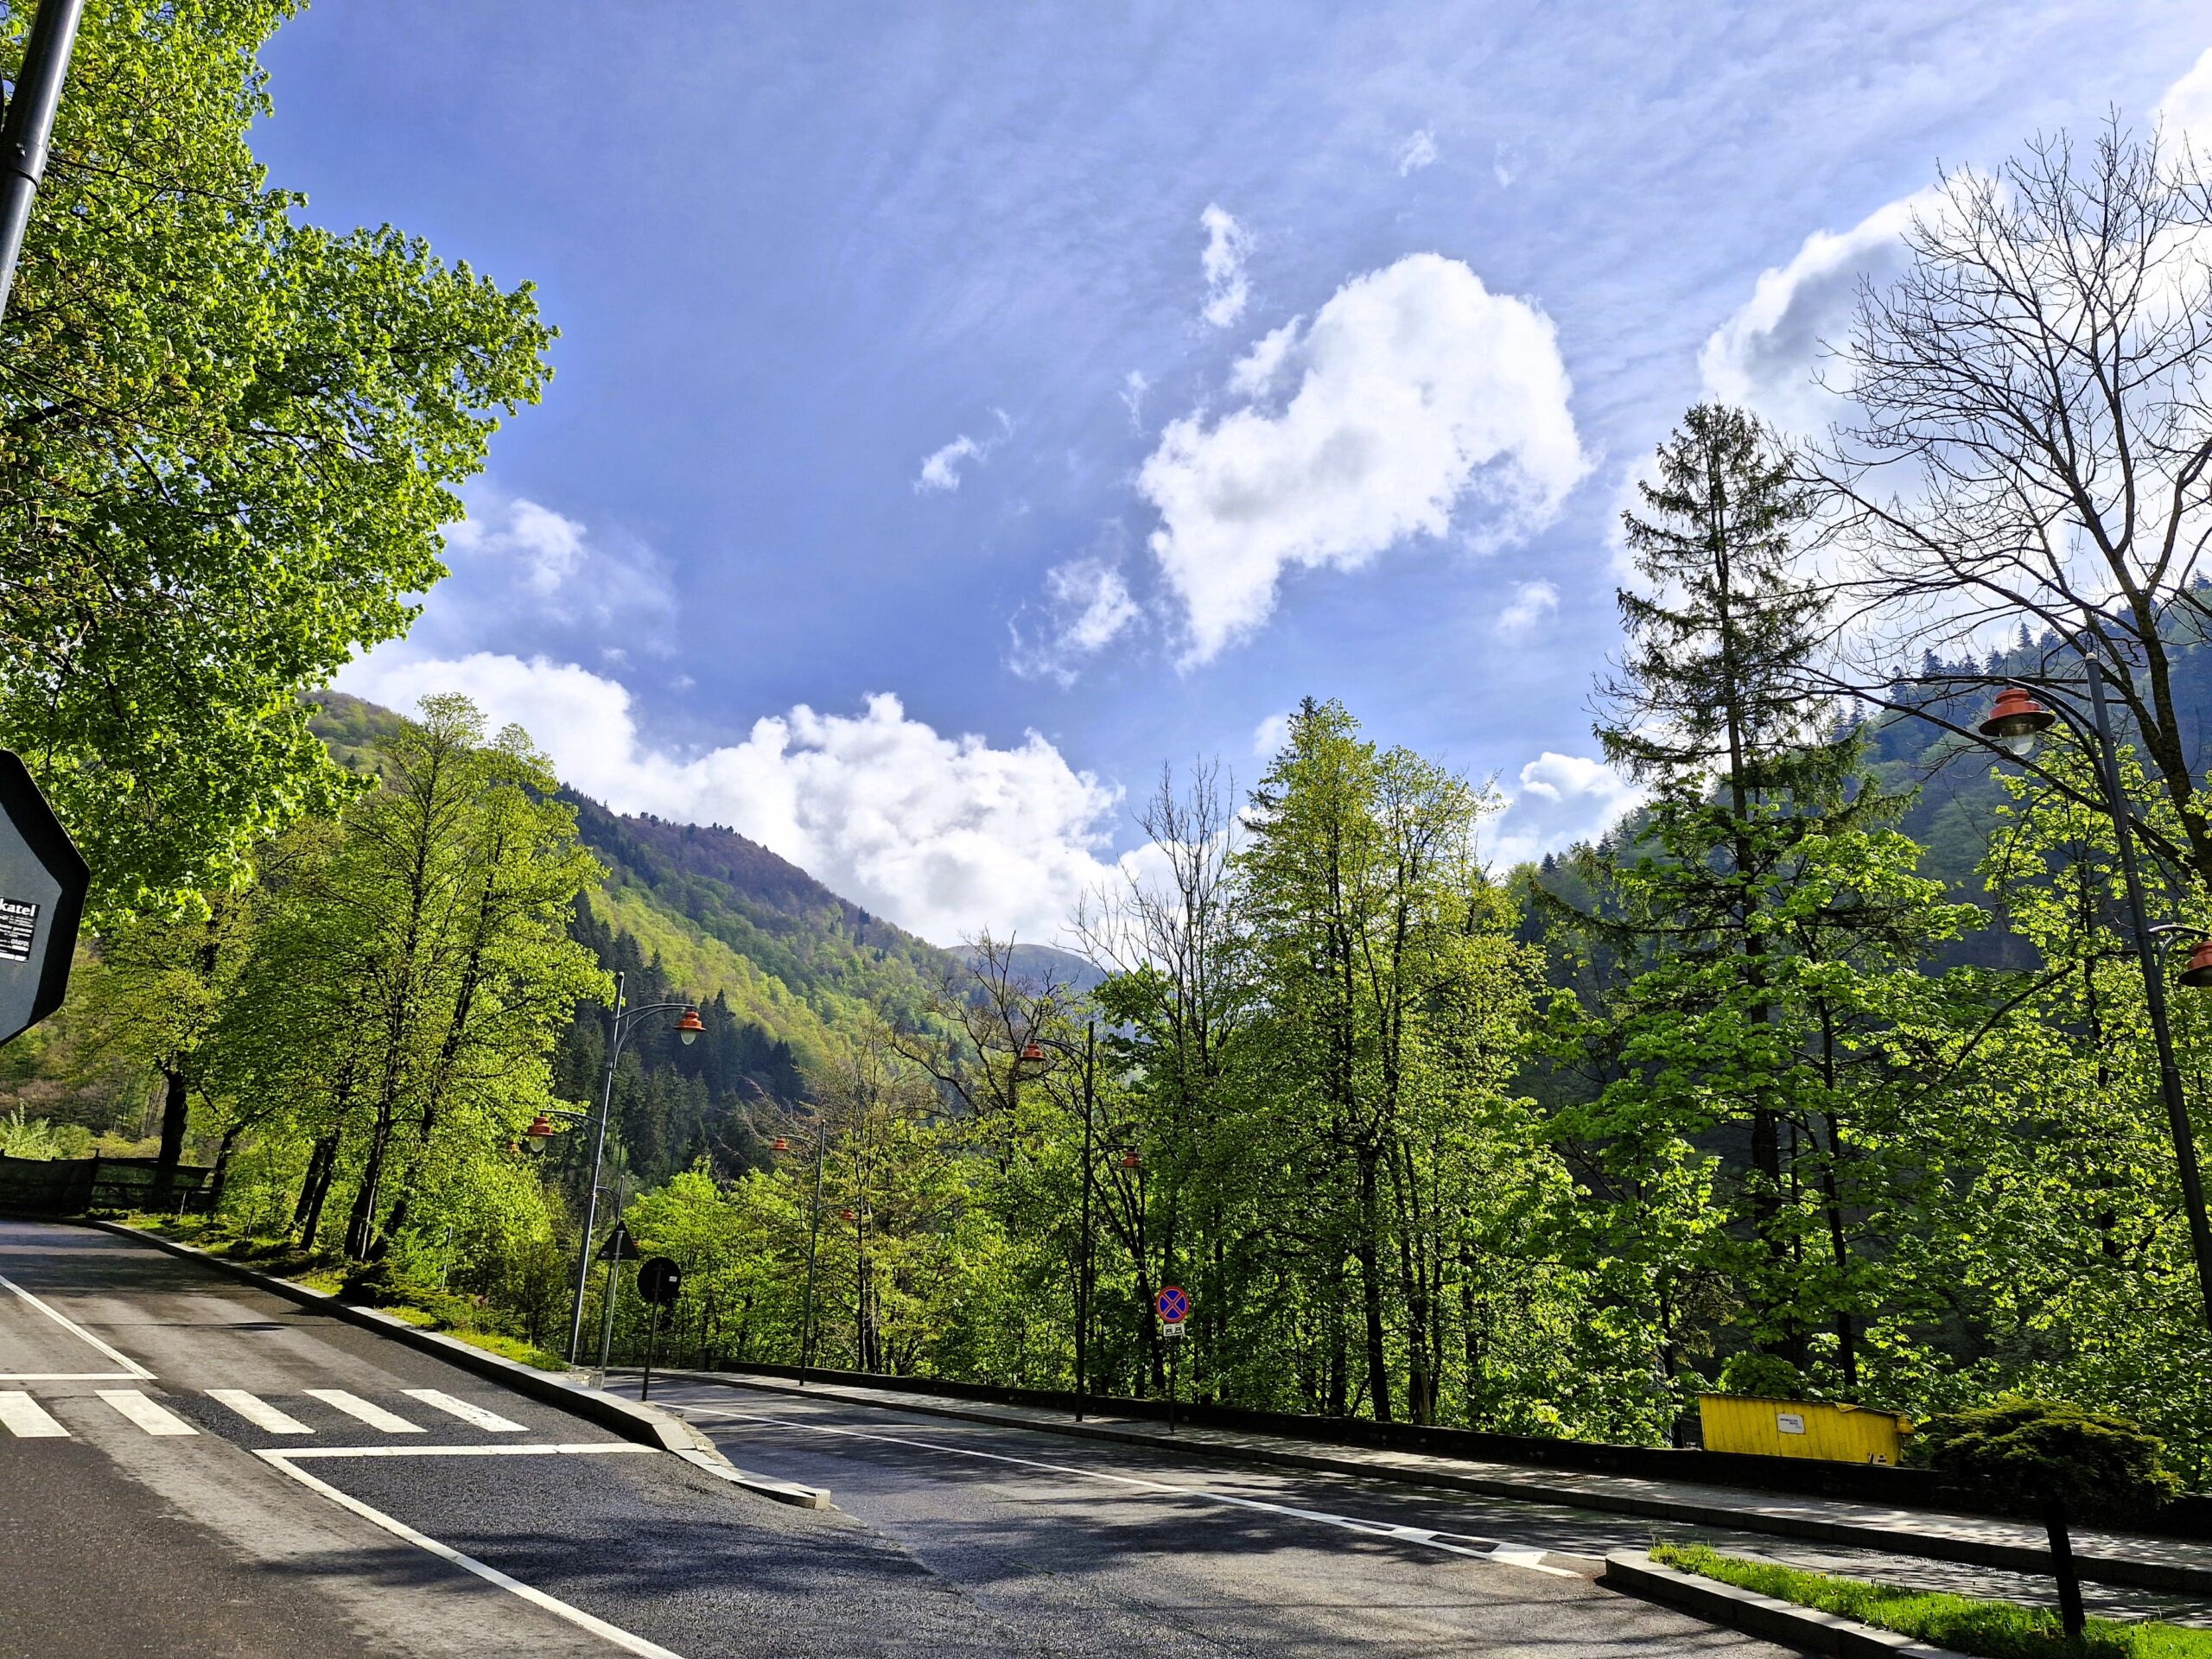 A deserted road and stunning green mountain range as seen by Wandering Lewis in Sinaia